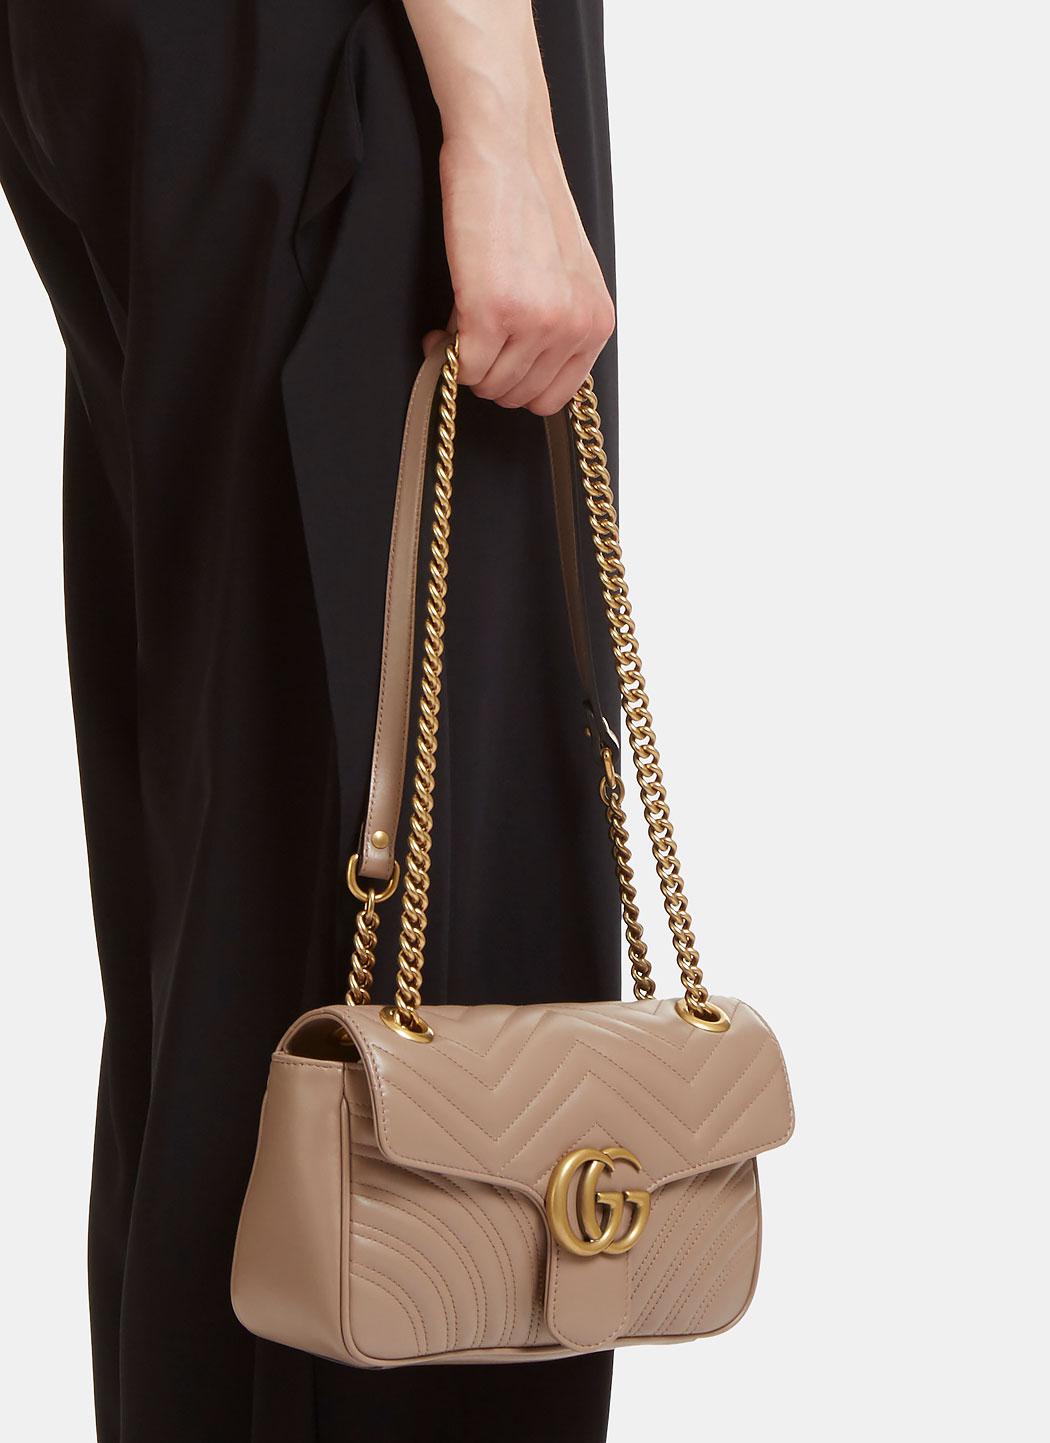 Gucci Leather Gg Marmont Matelassé Small Chain Shoulder Bag In Taupe in Natural - Lyst